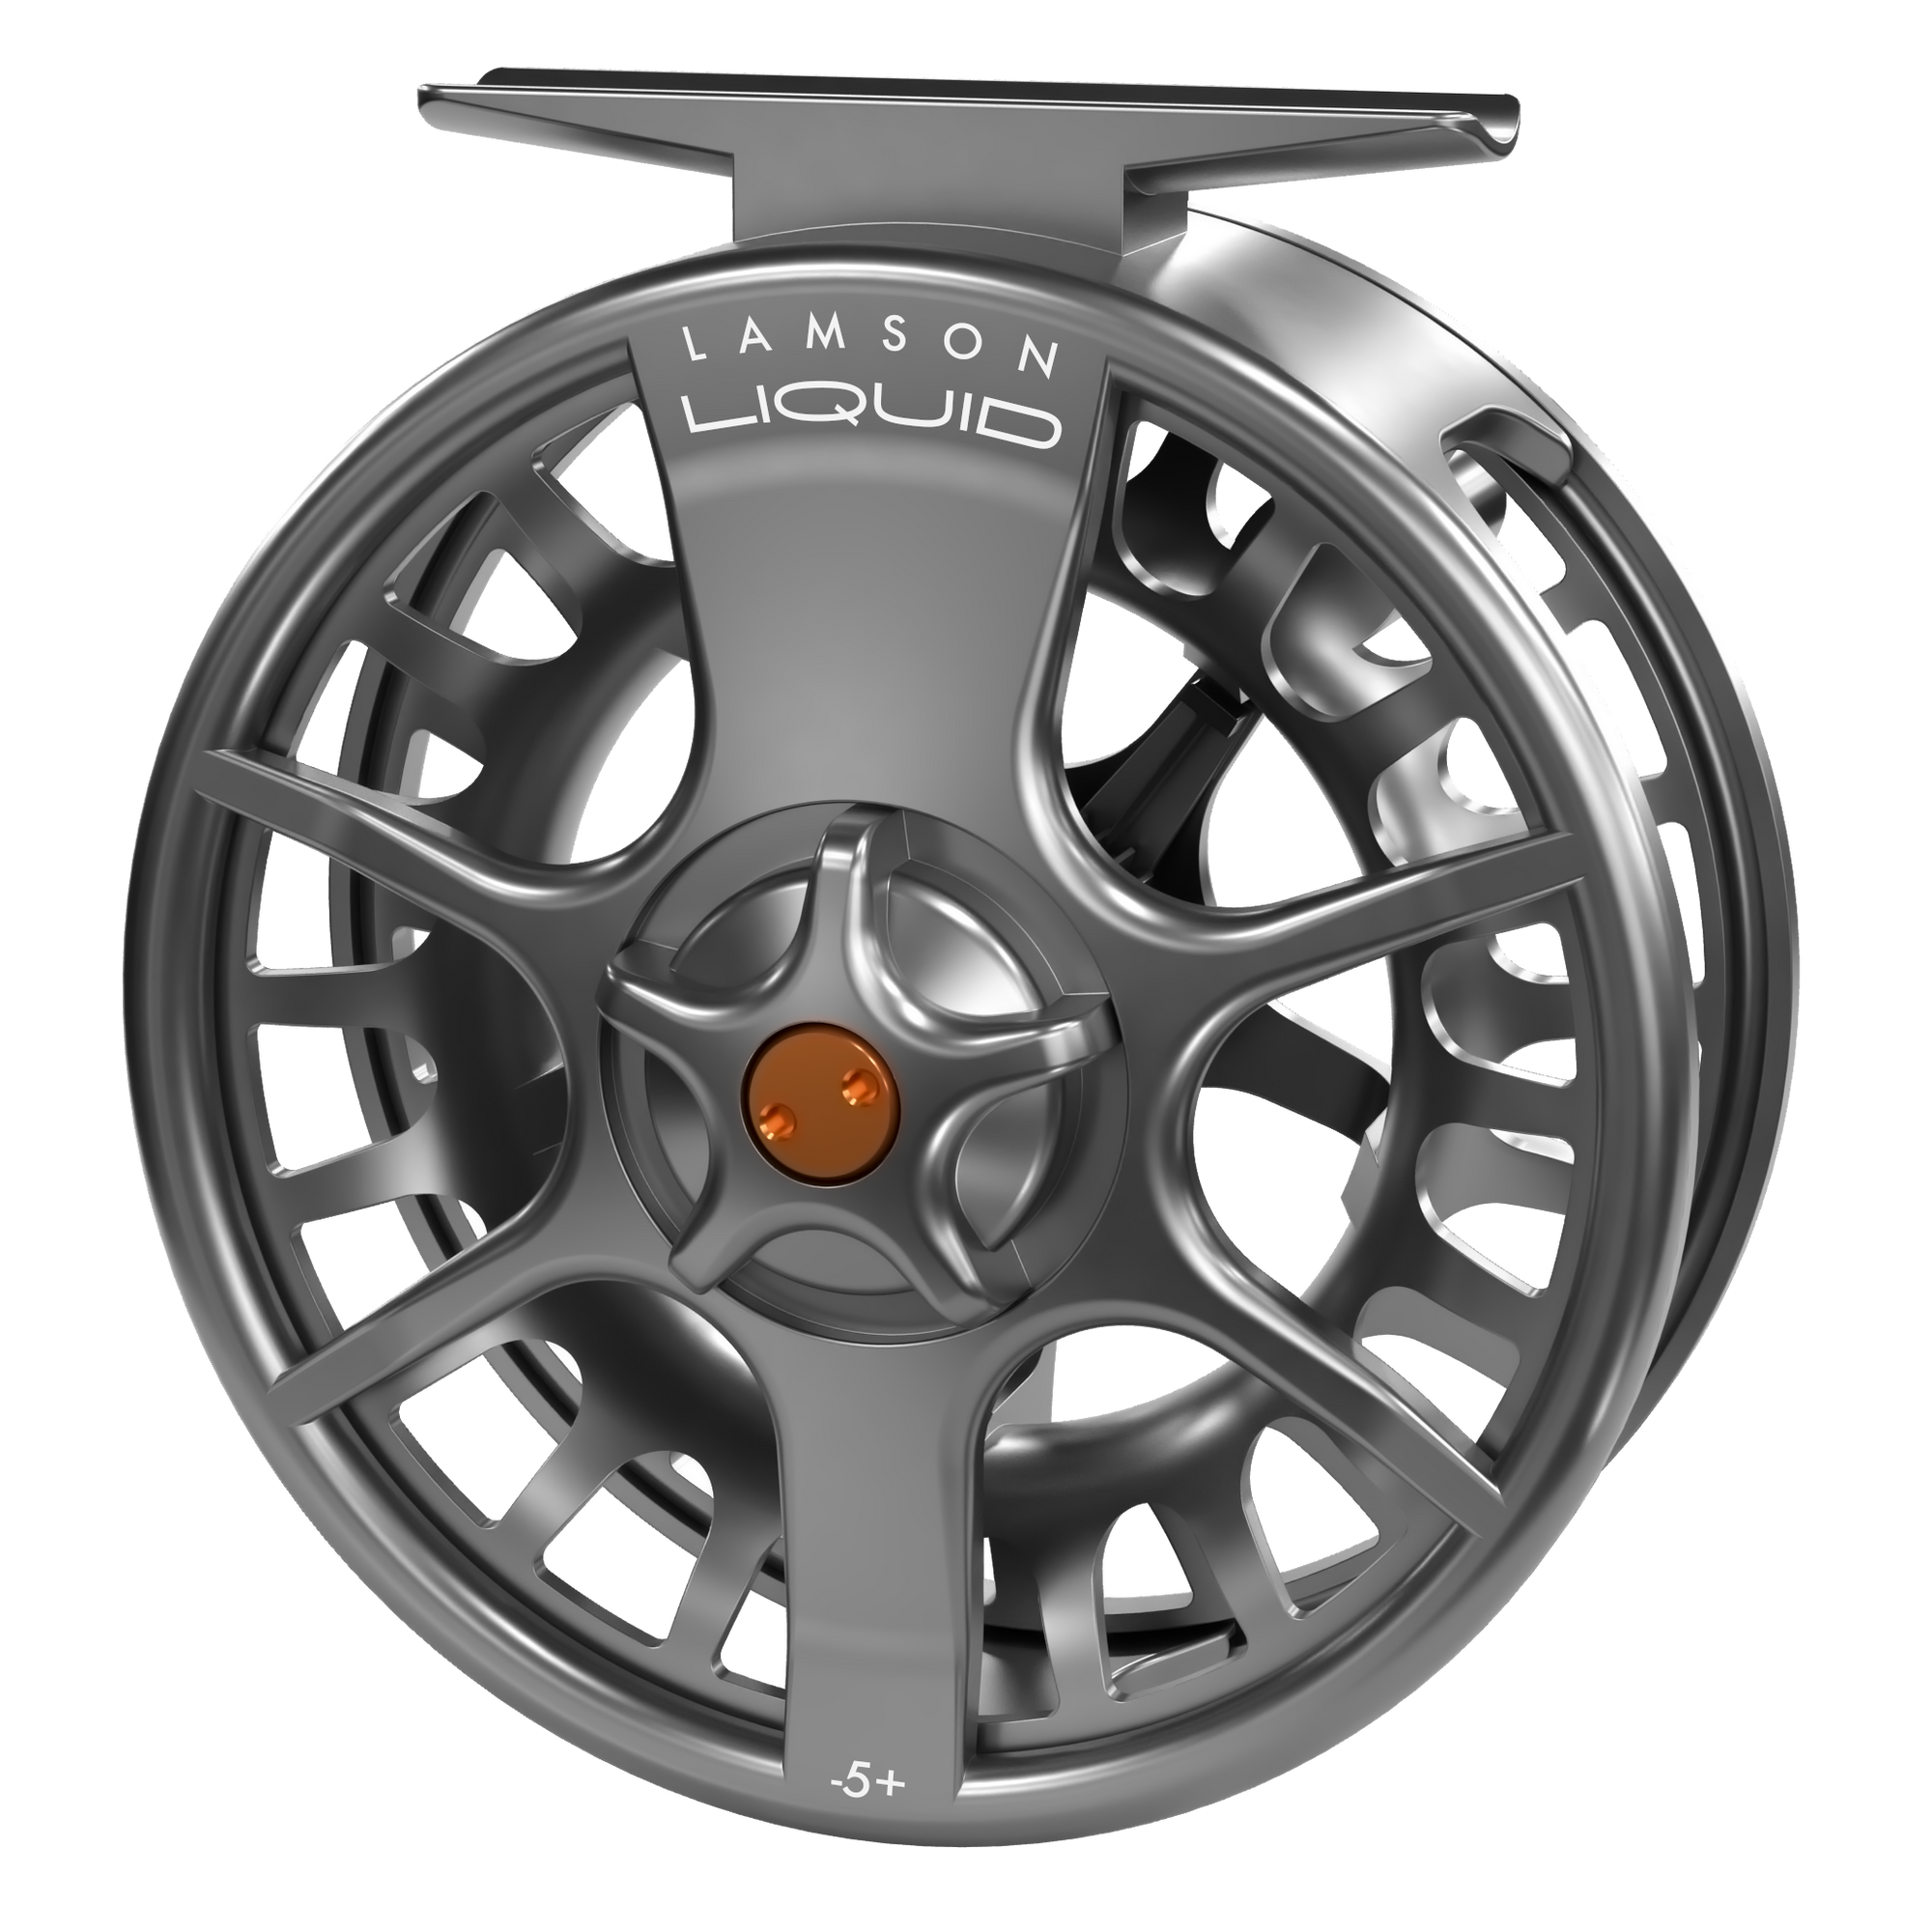 Waterworks & Lamson Fly Reels – Glasgow Angling Centre